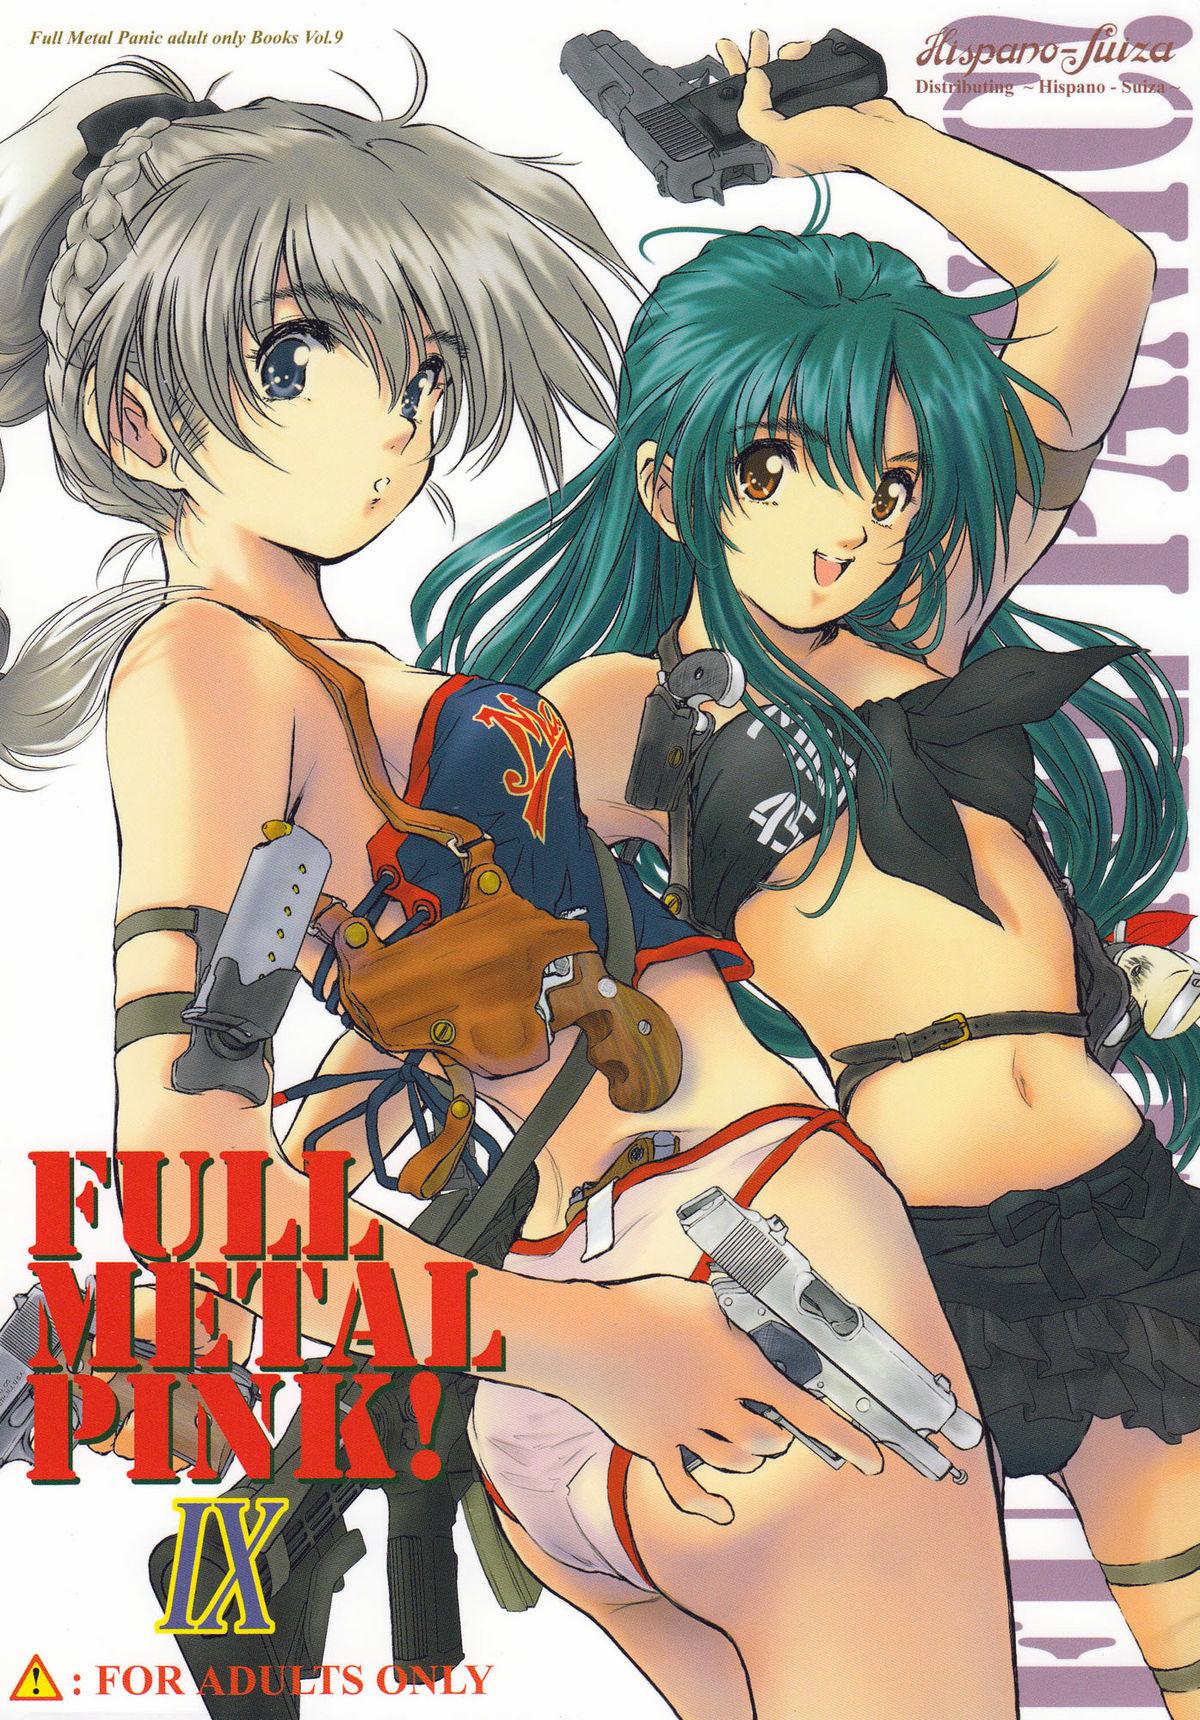 Mother fuck Full Metal Pink! IX - Full metal panic Chubby - Picture 1